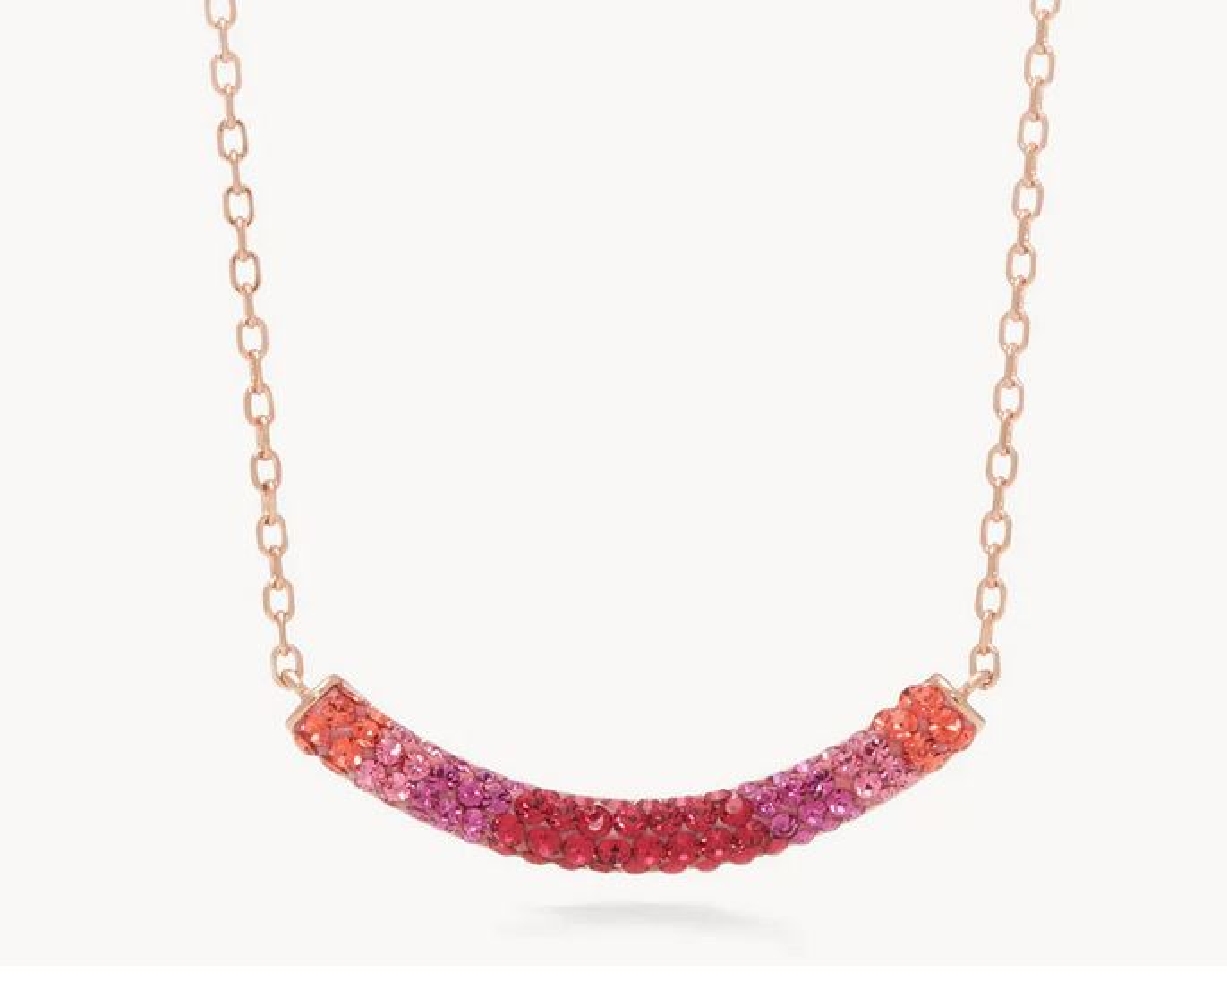 H&amp;B
Sparkle Curved Bar Necklace
Prismatic Pin...